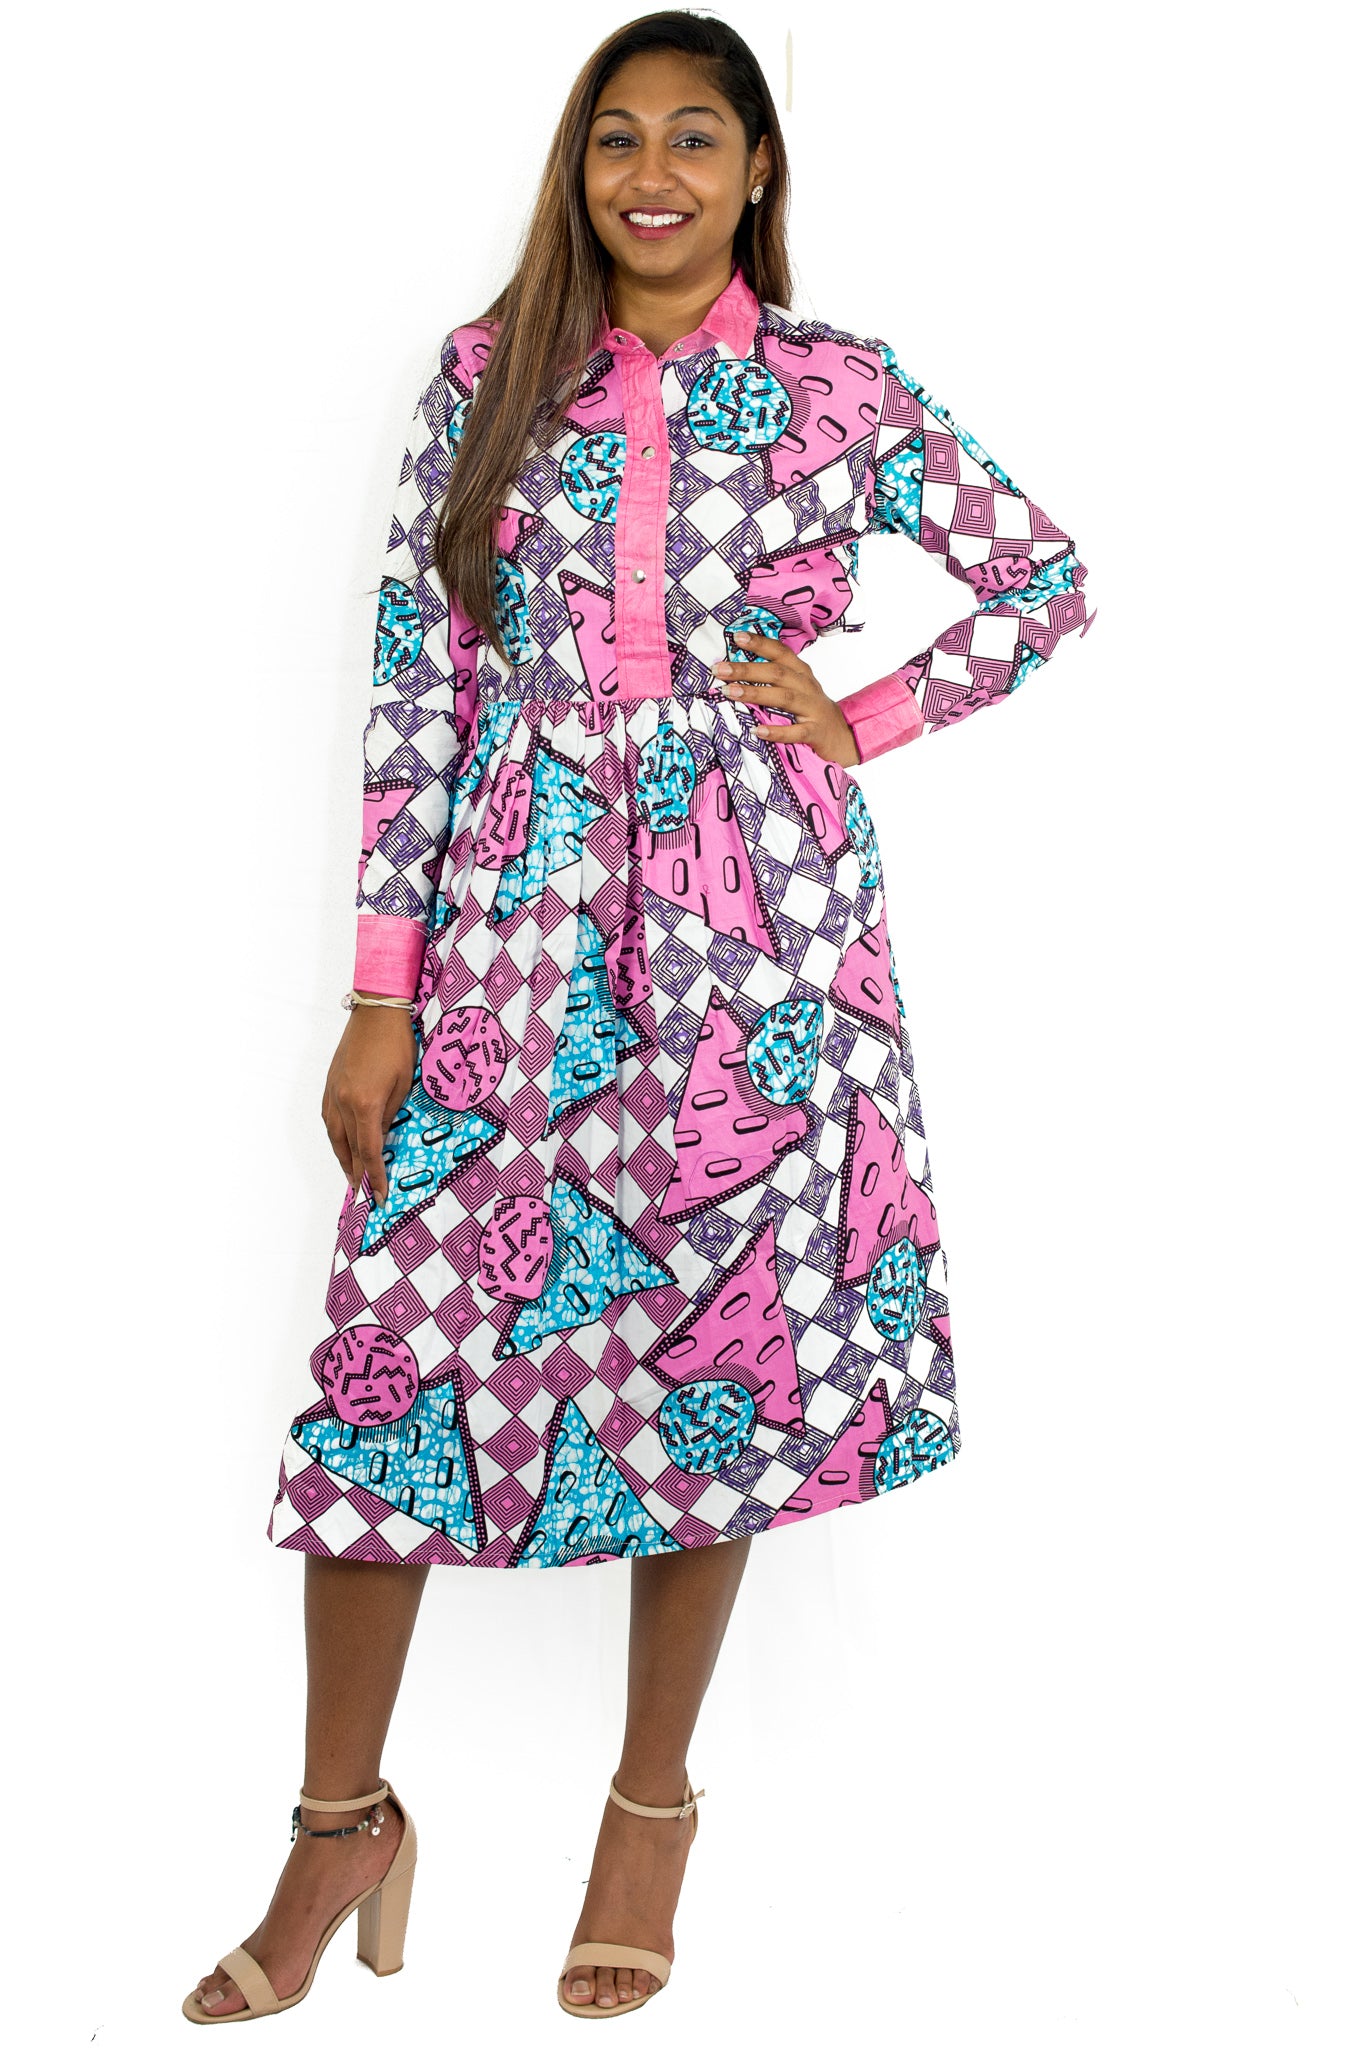 Latest Ankara Styles Pictures 2020 Most Popular Styles To Try  Fashion   Nigeria